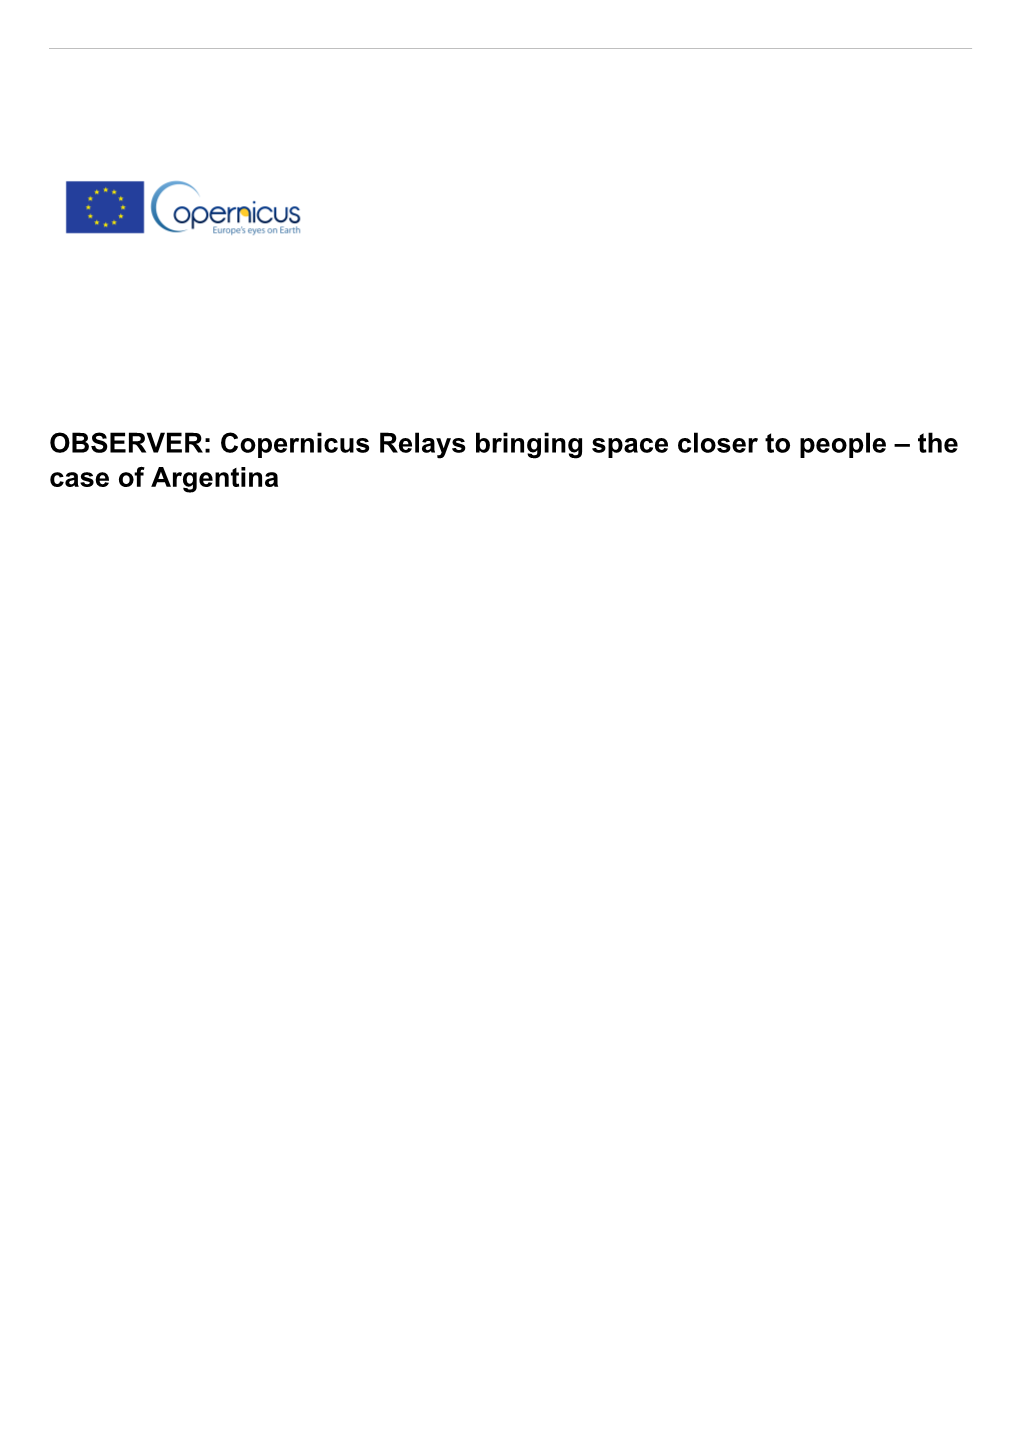 OBSERVER: Copernicus Relays Bringing Space Closer to People – the Case of Argentina